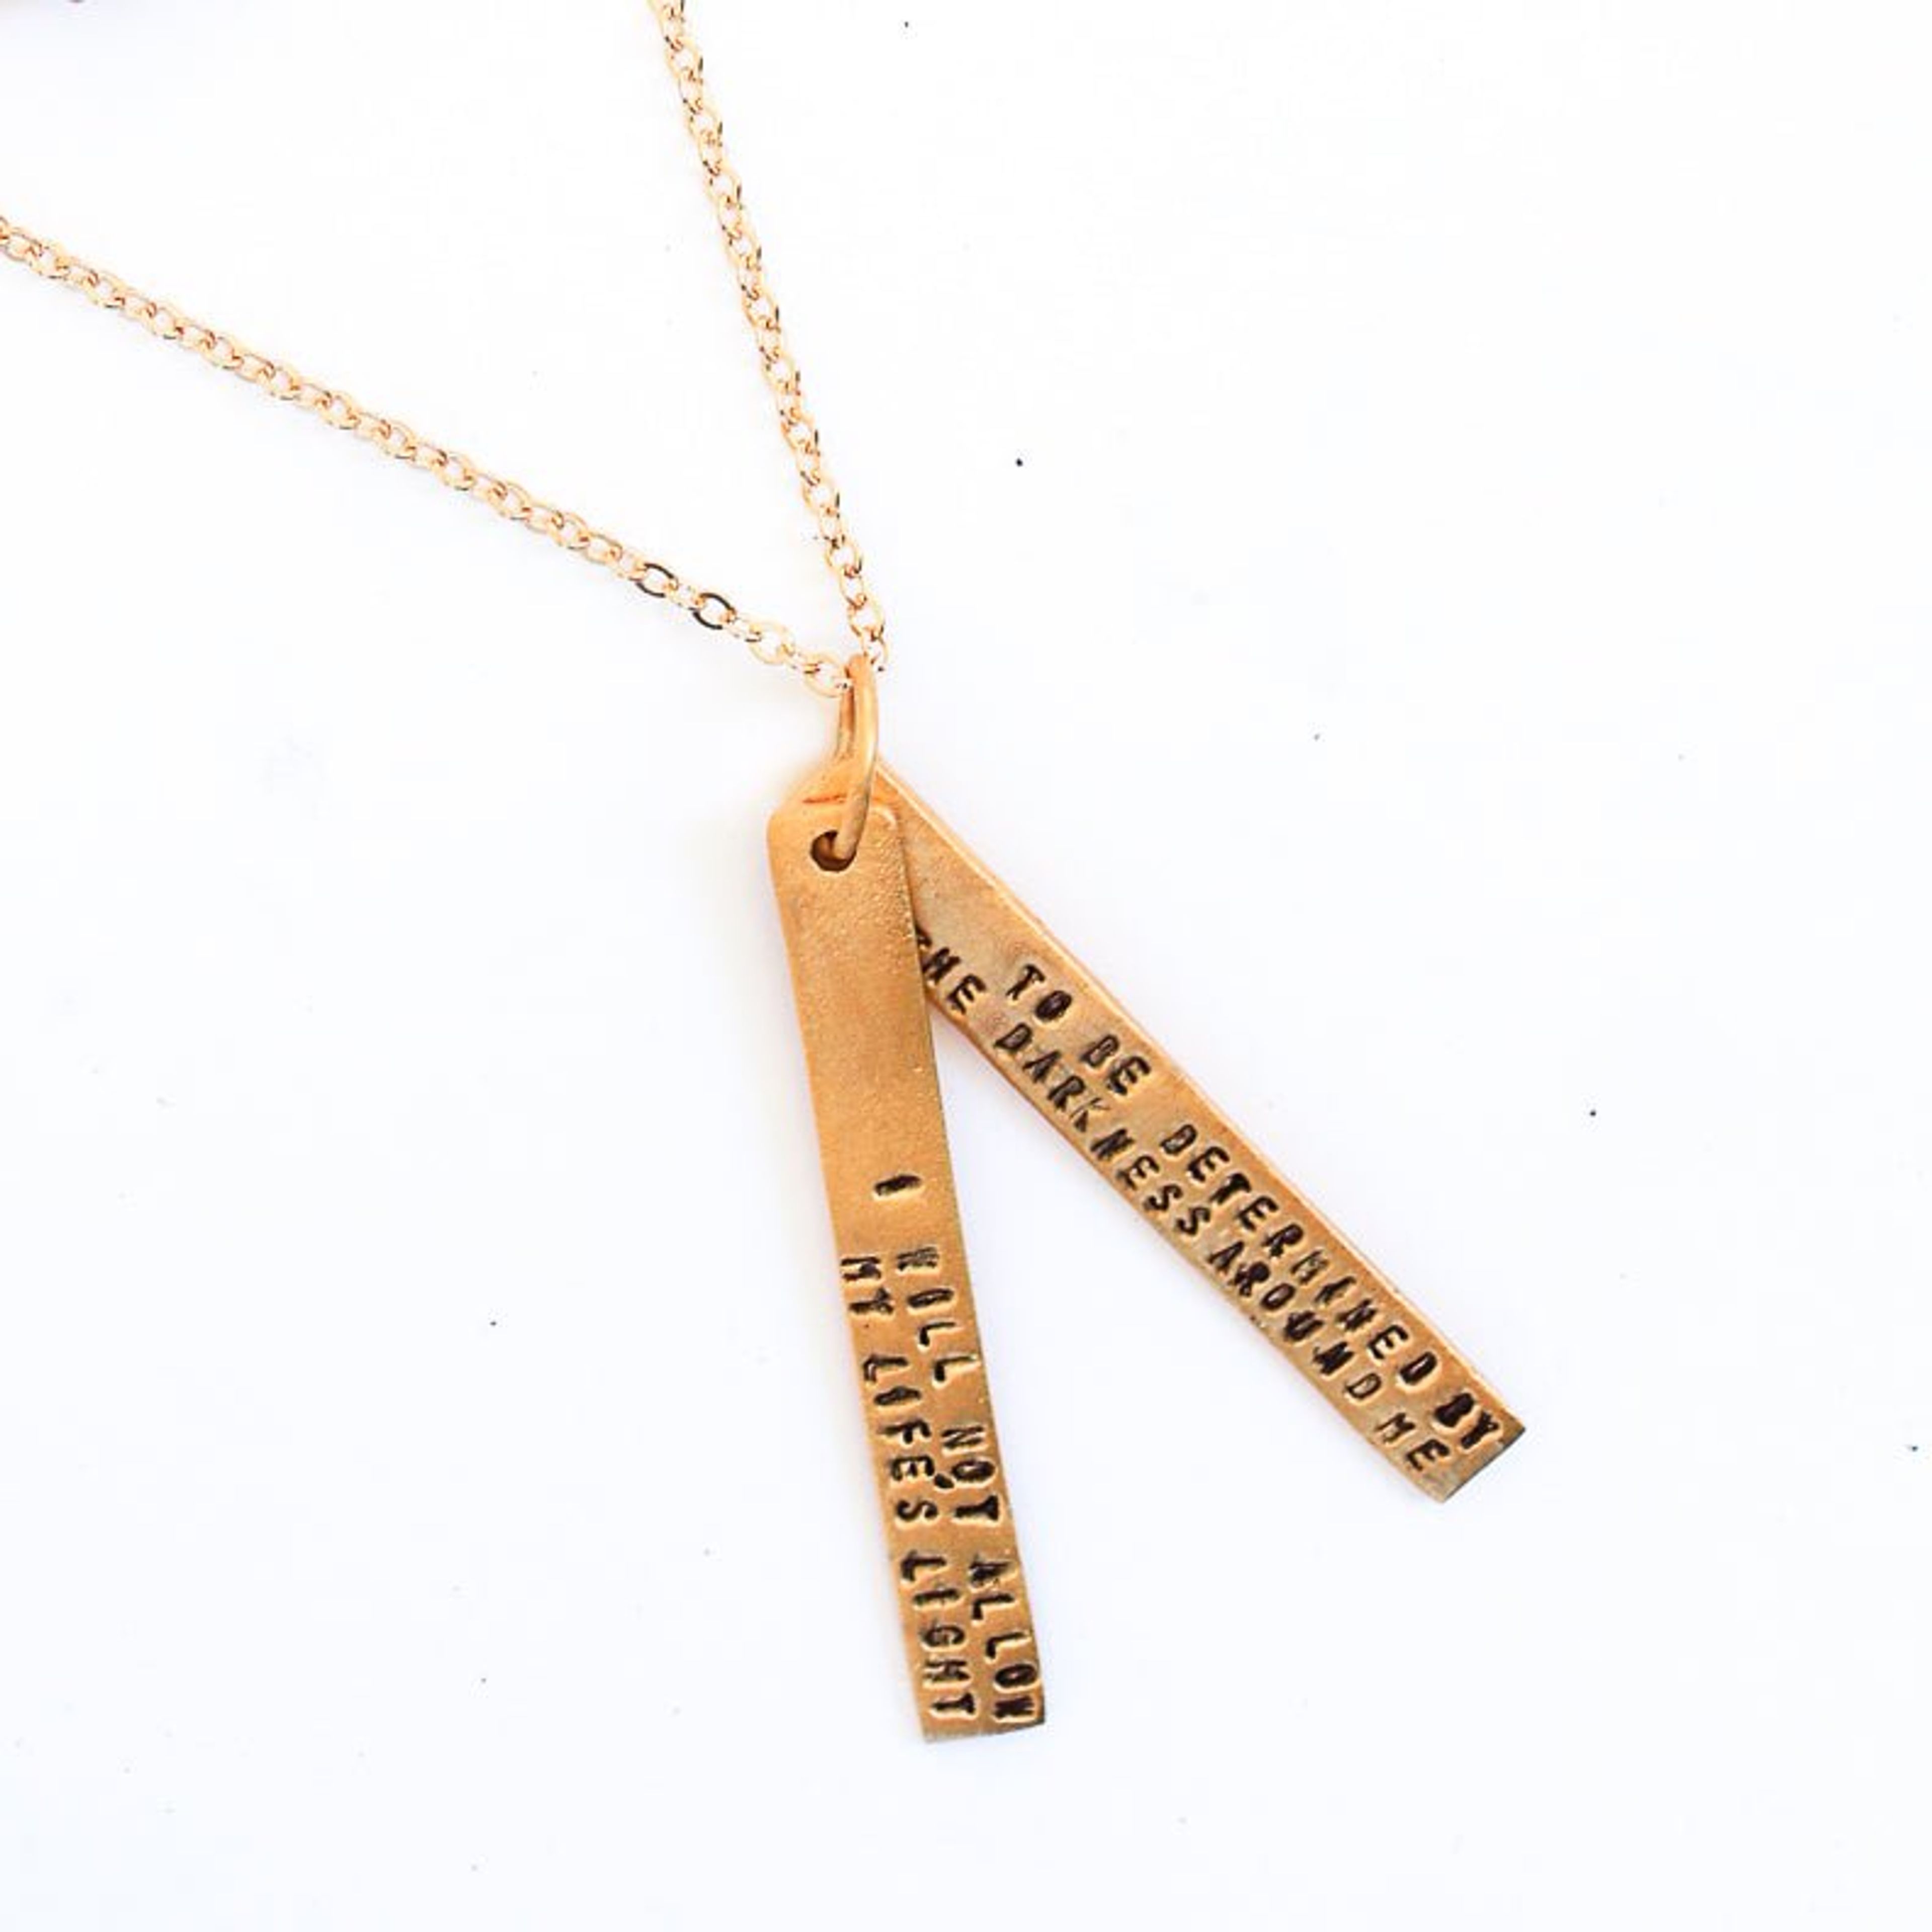 "I will not allow my life's light to be determined by the darkness around me" - Sojourner Truth quote necklace